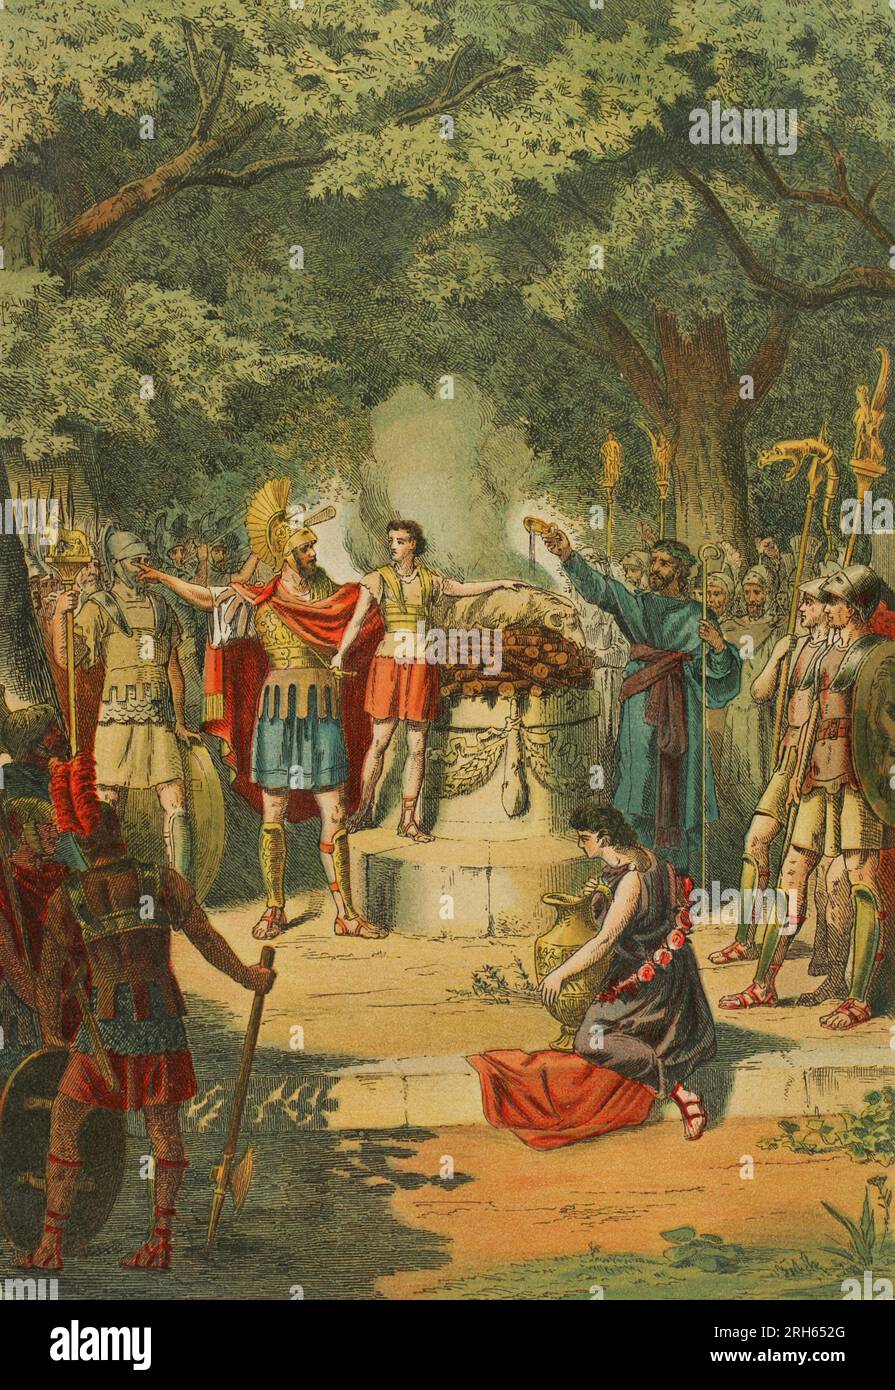 Hannibal Barca (247-183 BC). Carthaginian general and statesman. Hannibal in the Temple of Carthage with his father Hamilcar Barca, at the age of nine, taking an oath of eternal hatred of Rome by dipping his hands in the blood of the sacrificed animal. Chromolithography. "Historia Universal", by Cesar Cantu. Volume II, 1881. Stock Photo